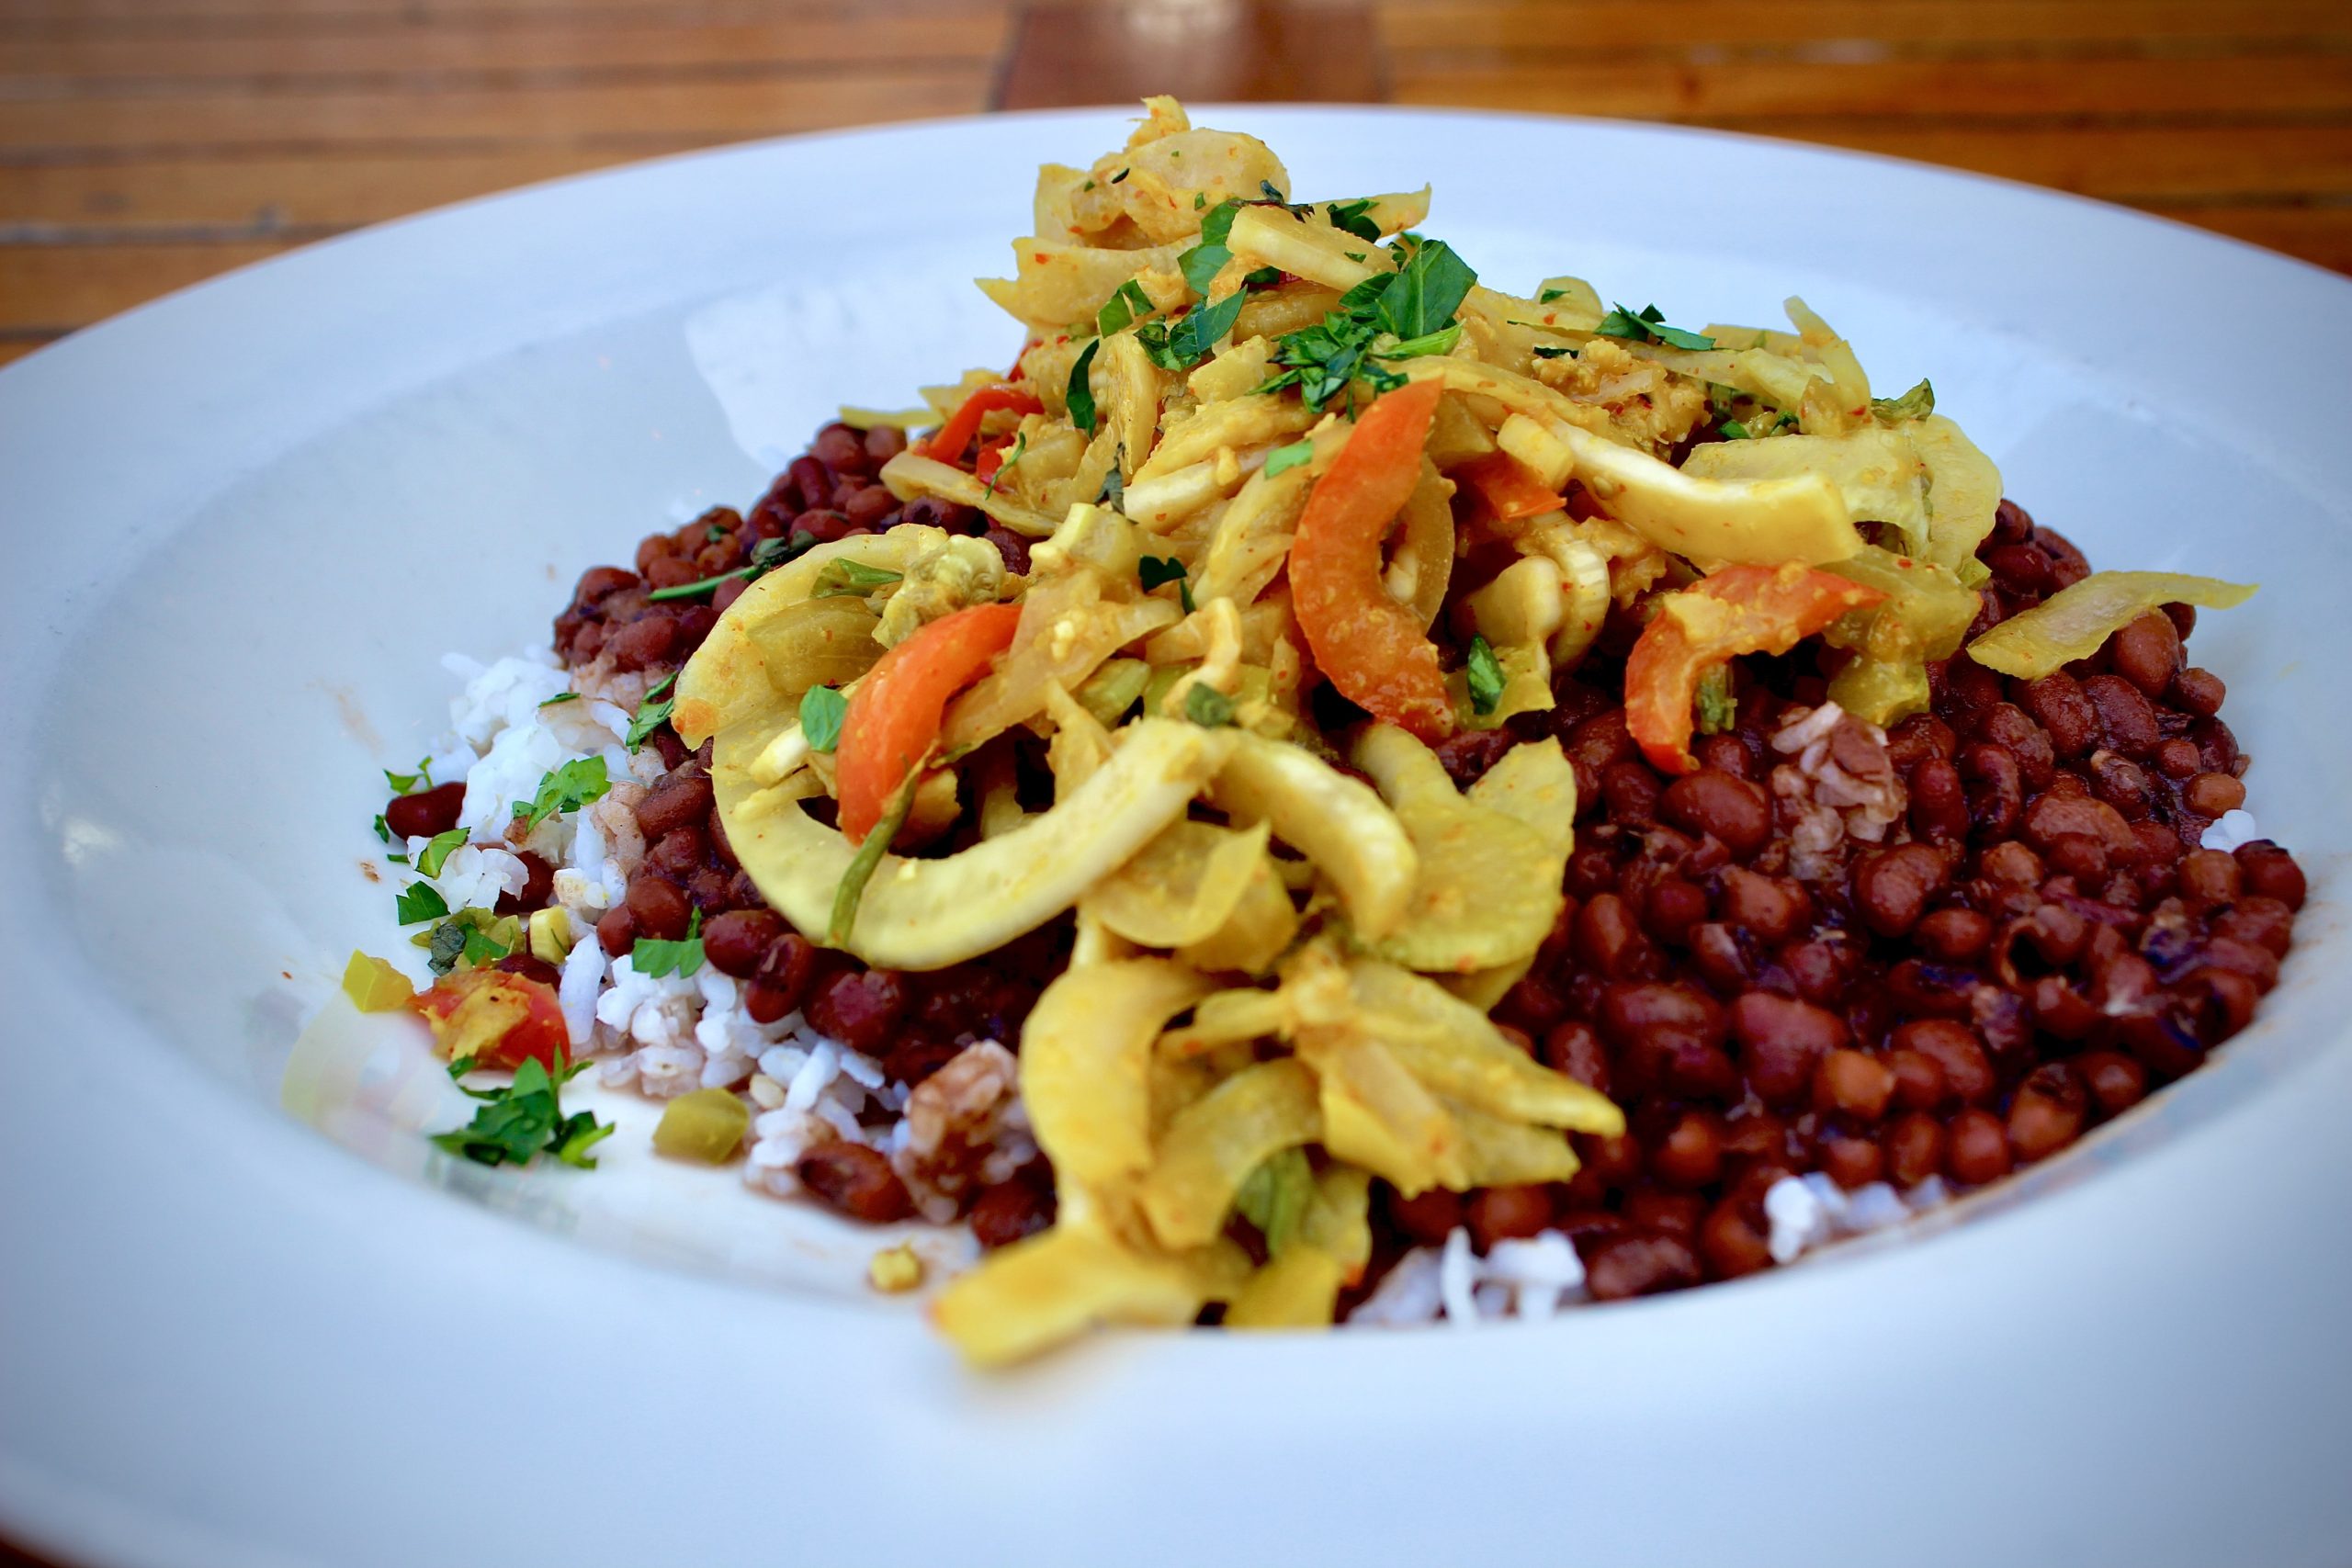 A dish of red peas and rice, topped with a bright fennel slaw.